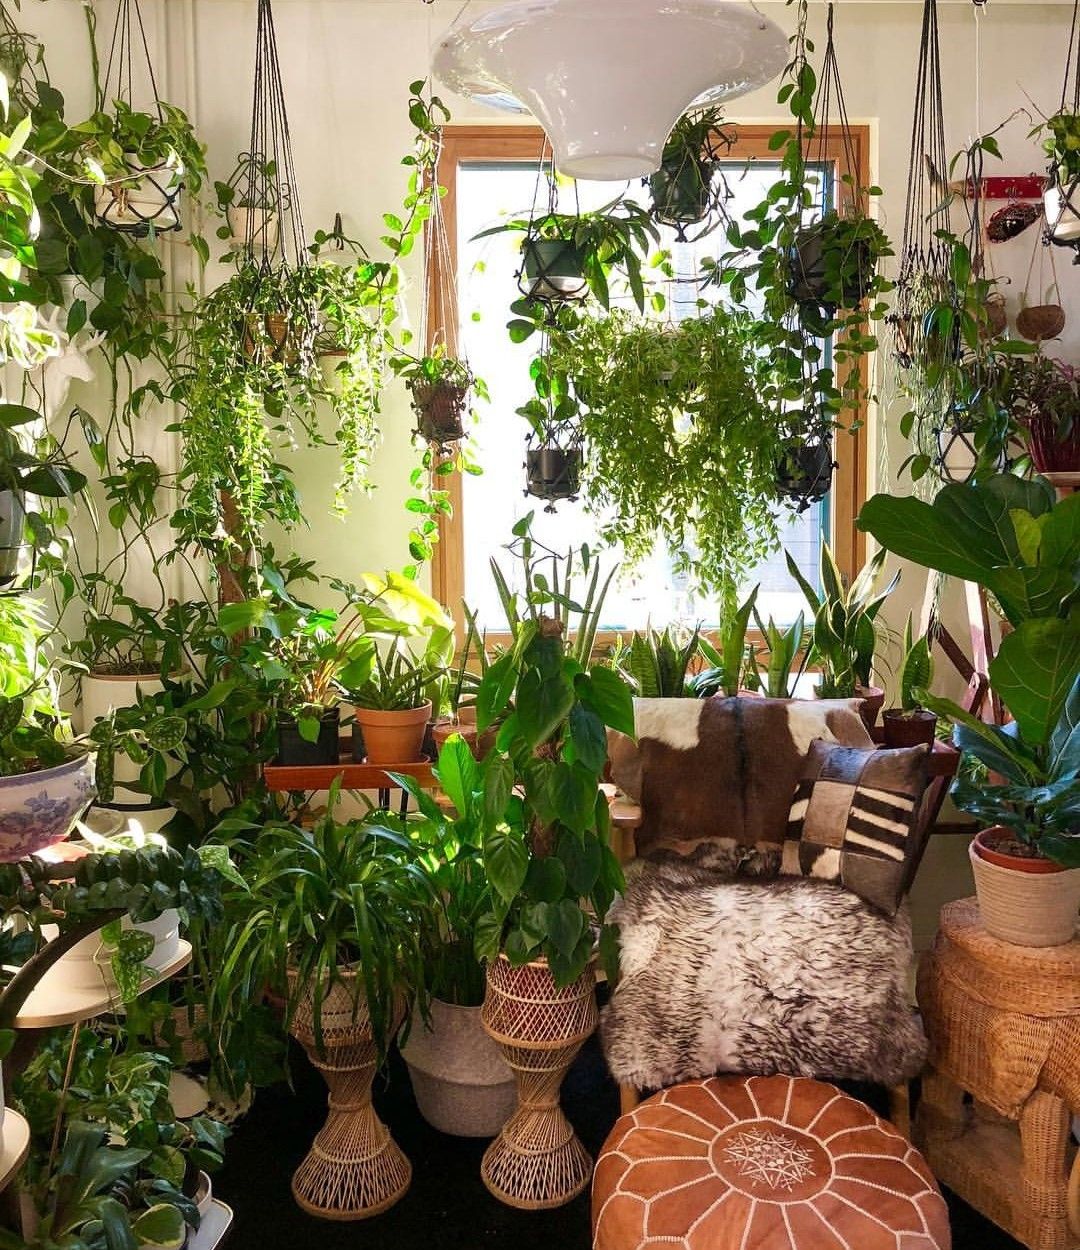 12 Indoor Plants For A Vibrant Home Decor